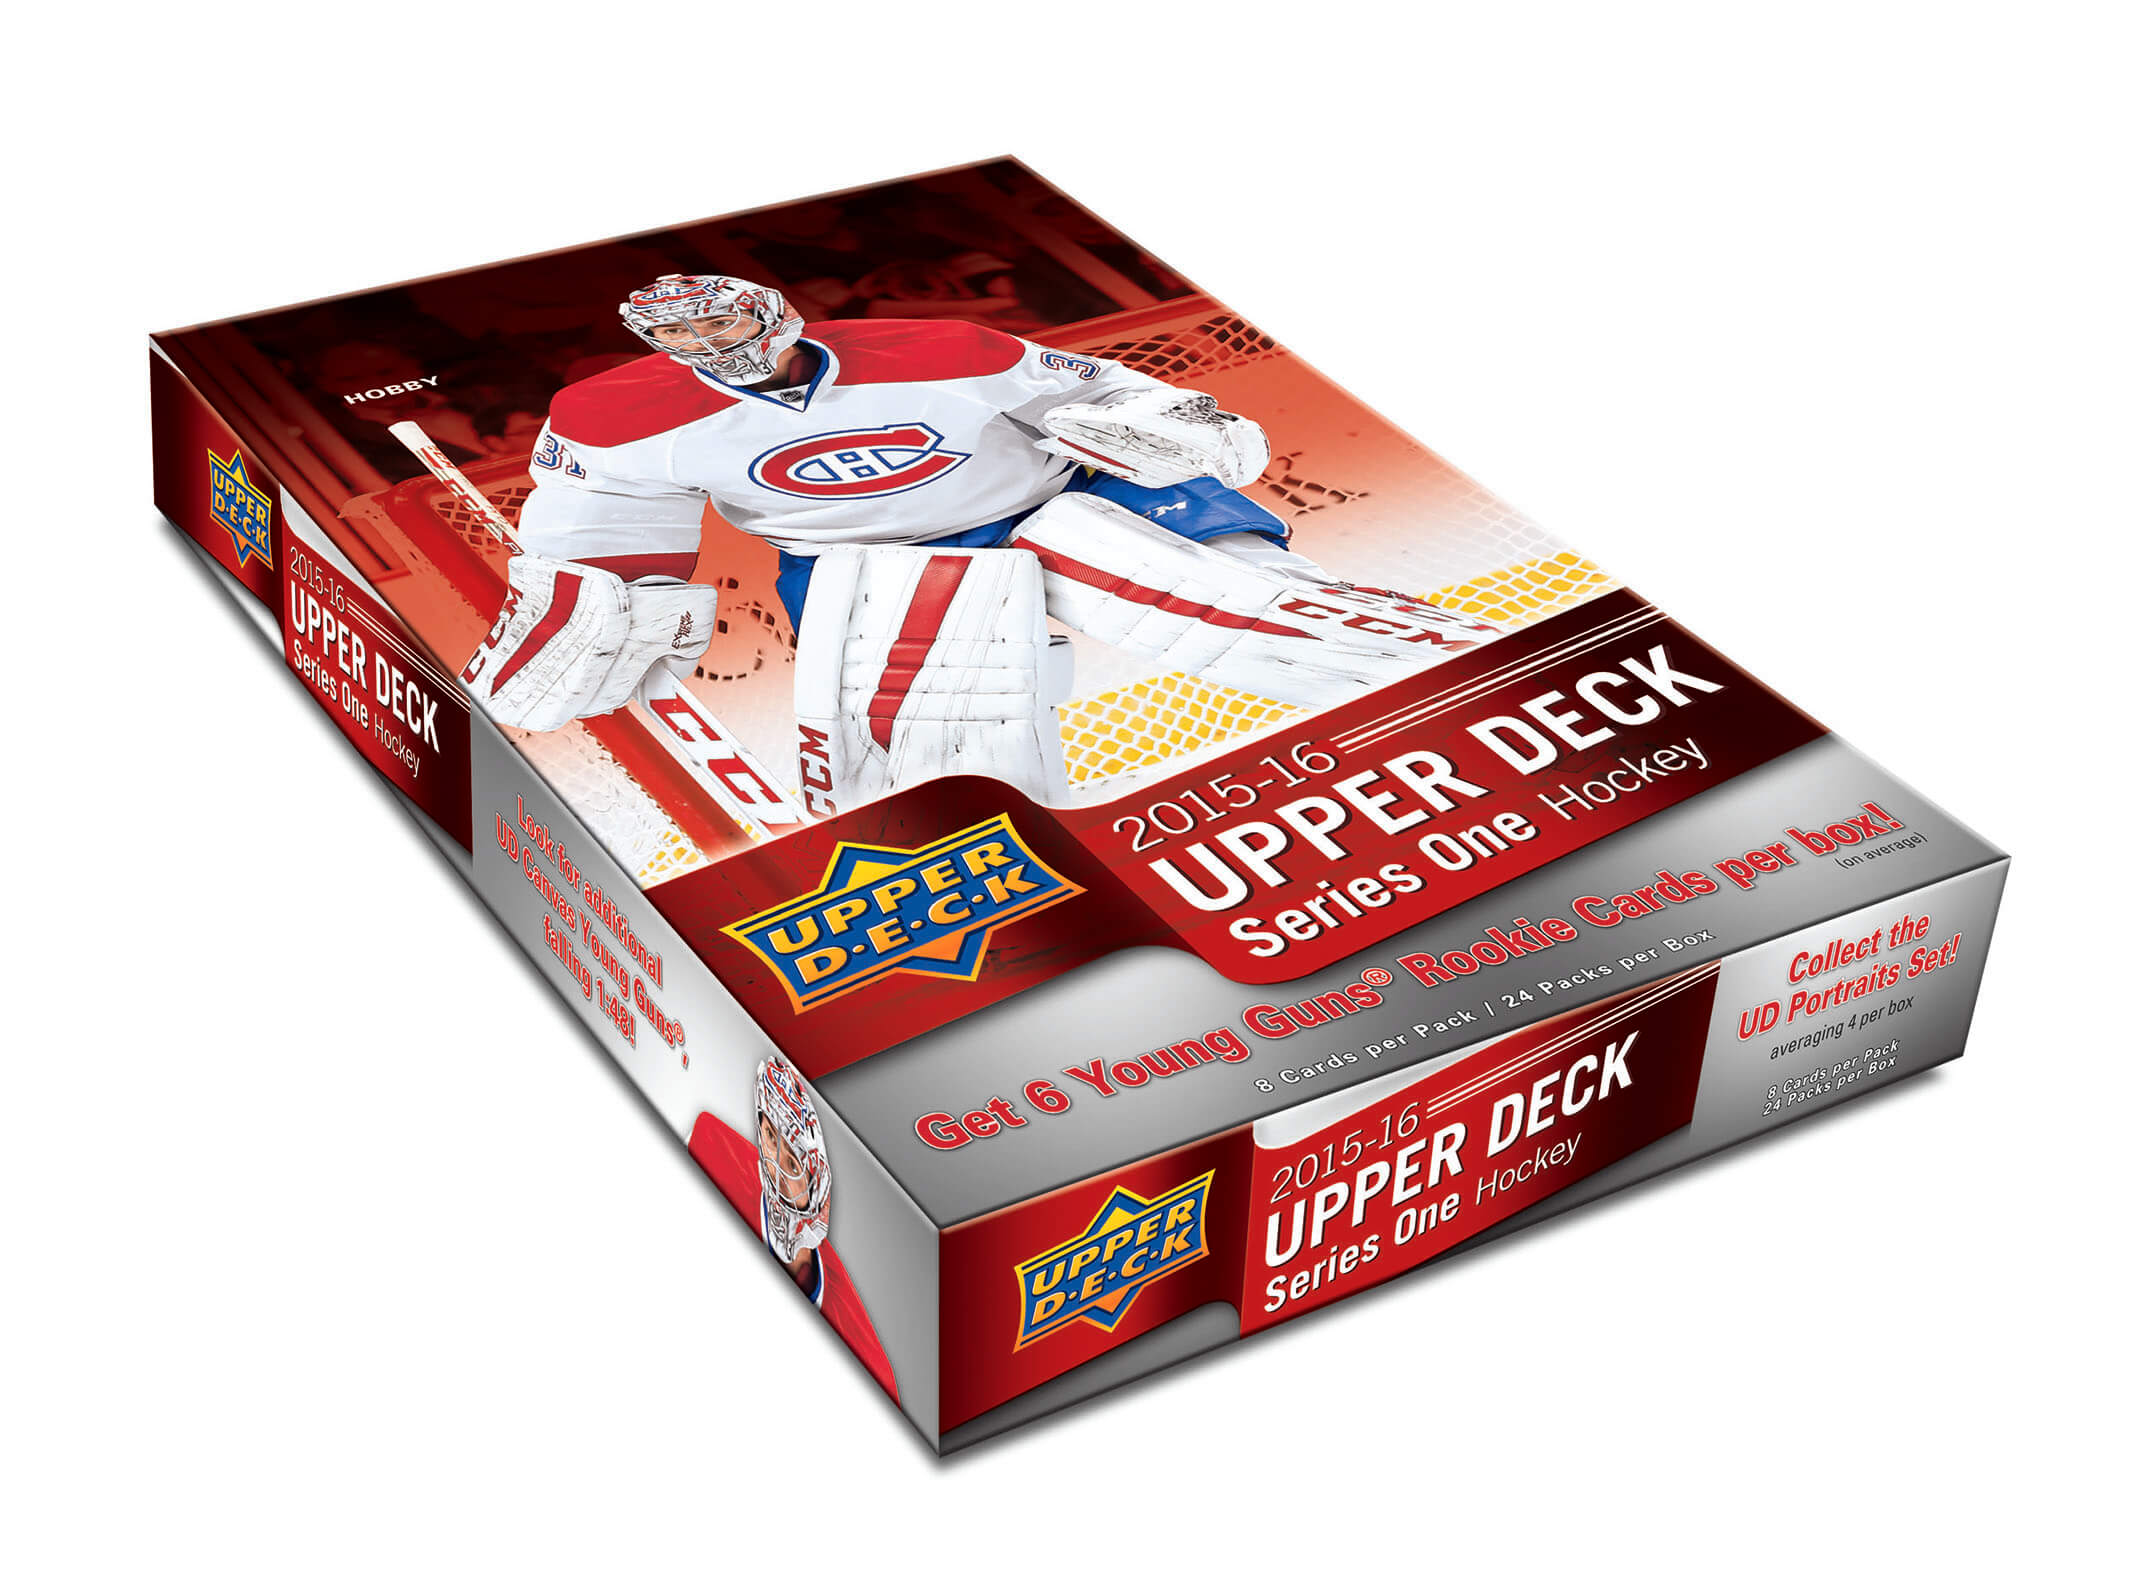 2015-16 Upper Deck Series 1 NHL Hockey Hobby Case (Boxes of 12) - BigBoi Cards